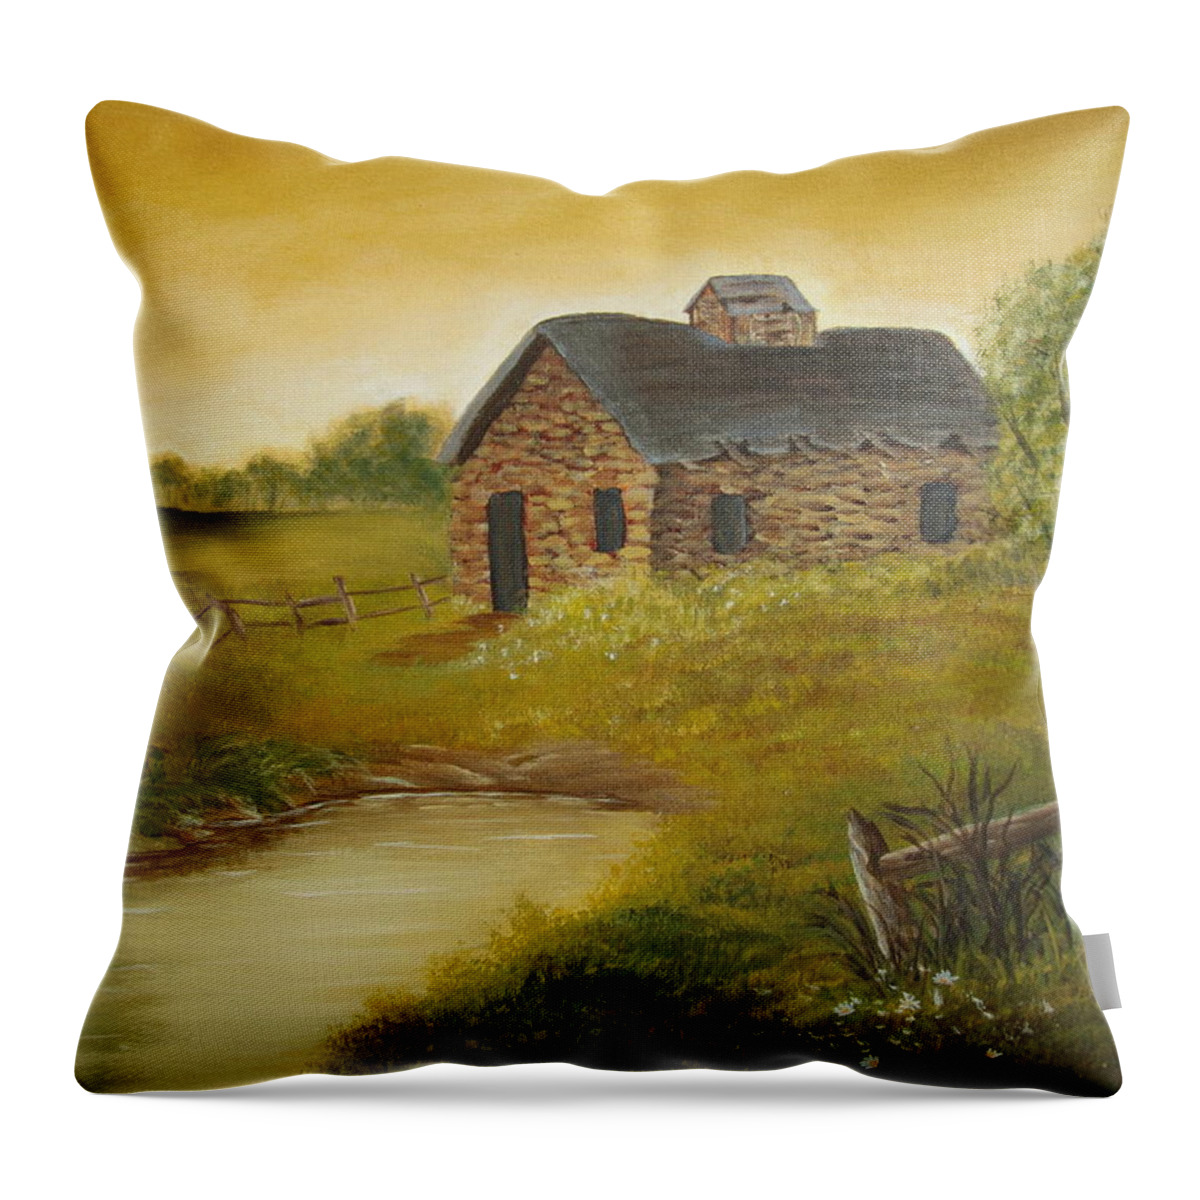 Road Throw Pillow featuring the painting Country Cabin by Kathy Sheeran